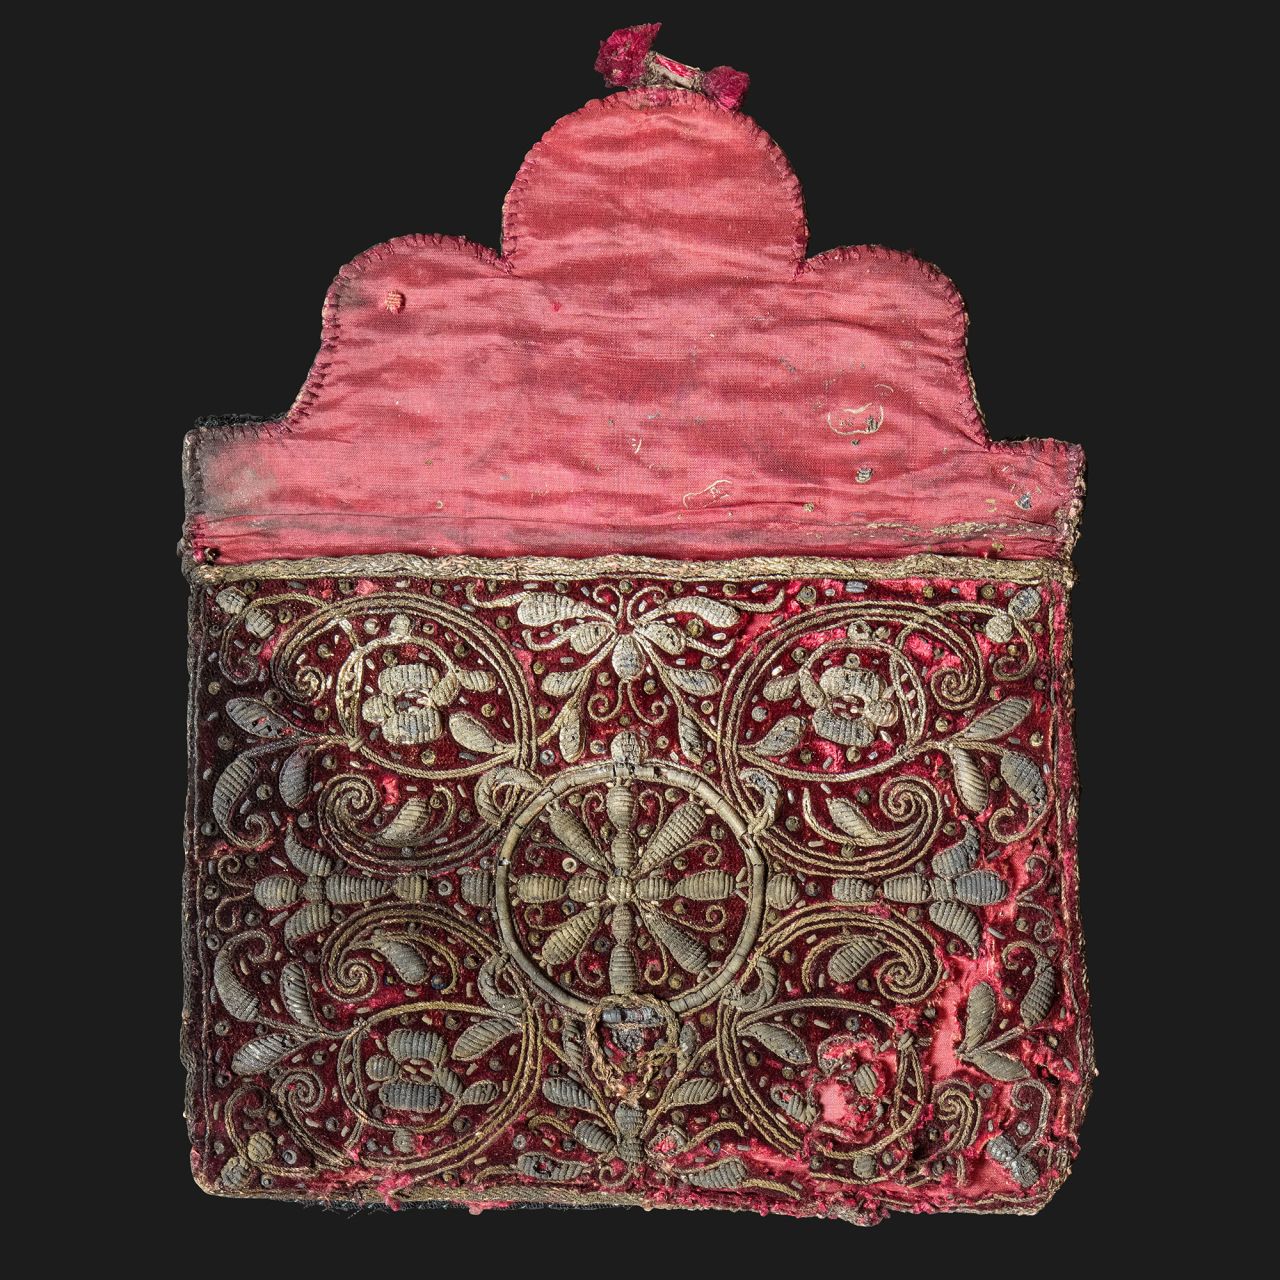 This red silk case housed a woman's toiletry case, which still held a comb, brush, pincushion and mirror inside.